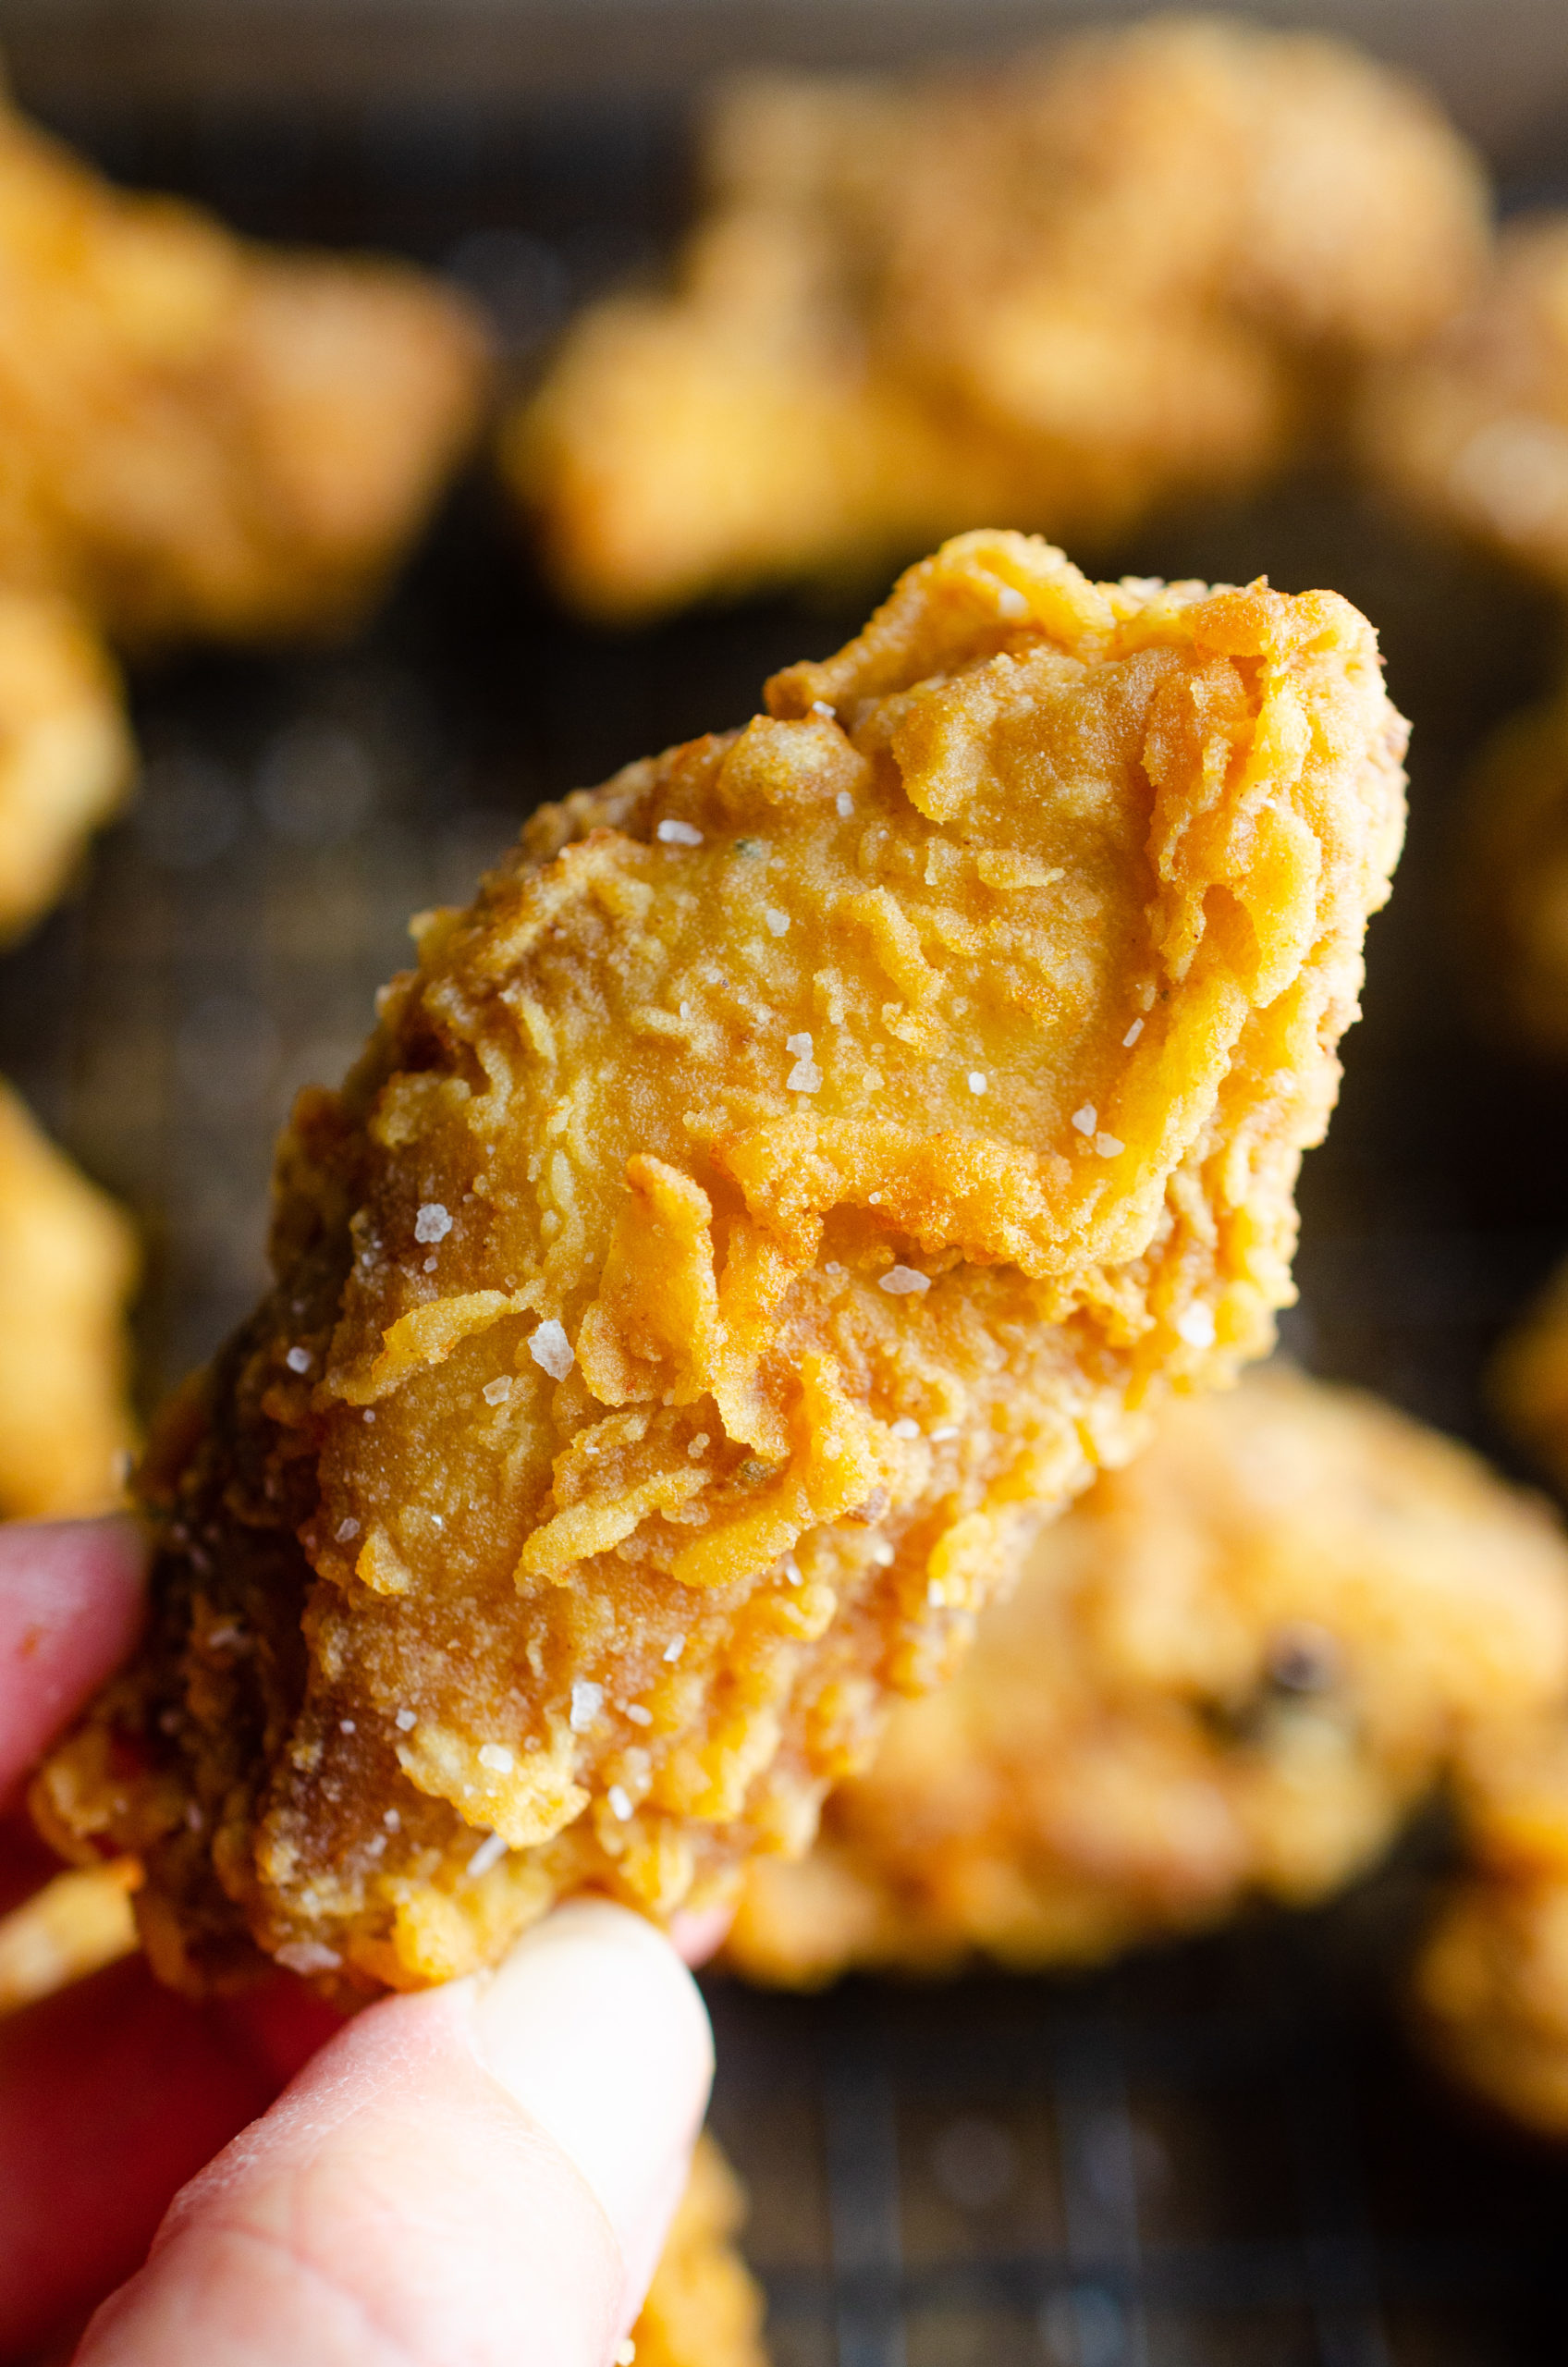 Deep Fried Chicken Wings Recipe | Life's Ambrosia